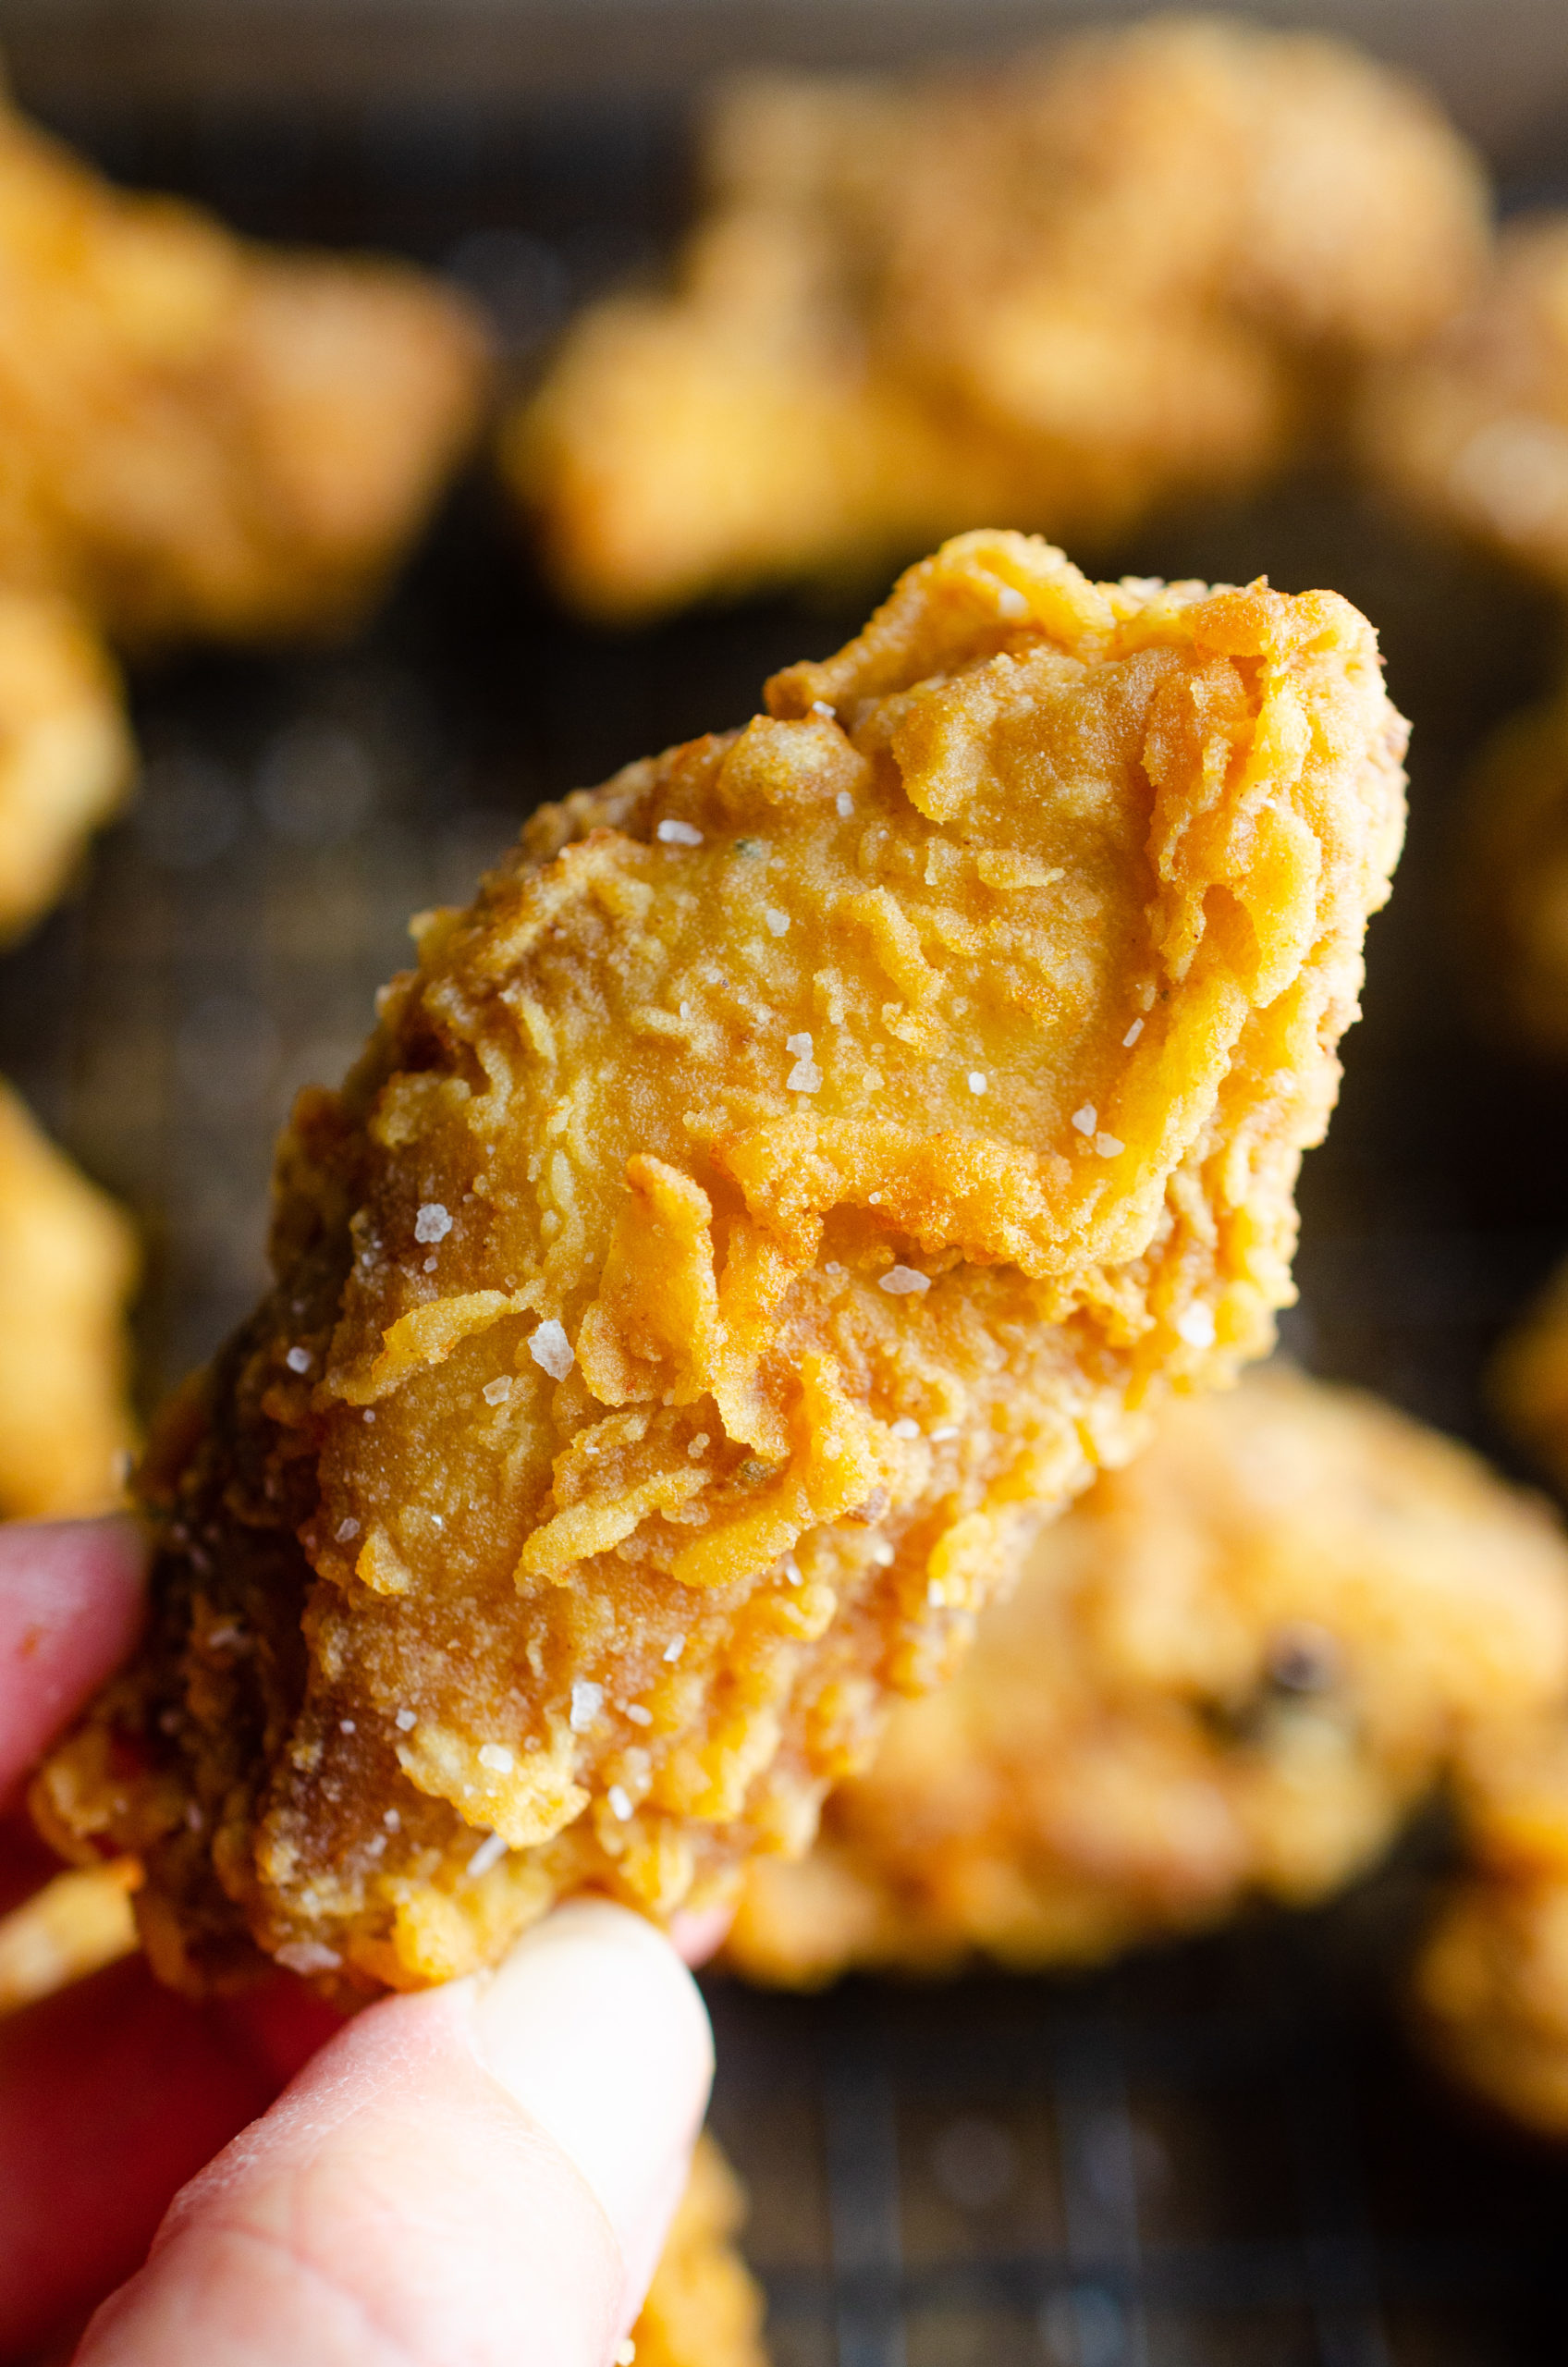 Deep Fried Chicken Wings Recipe | Life's Ambrosia